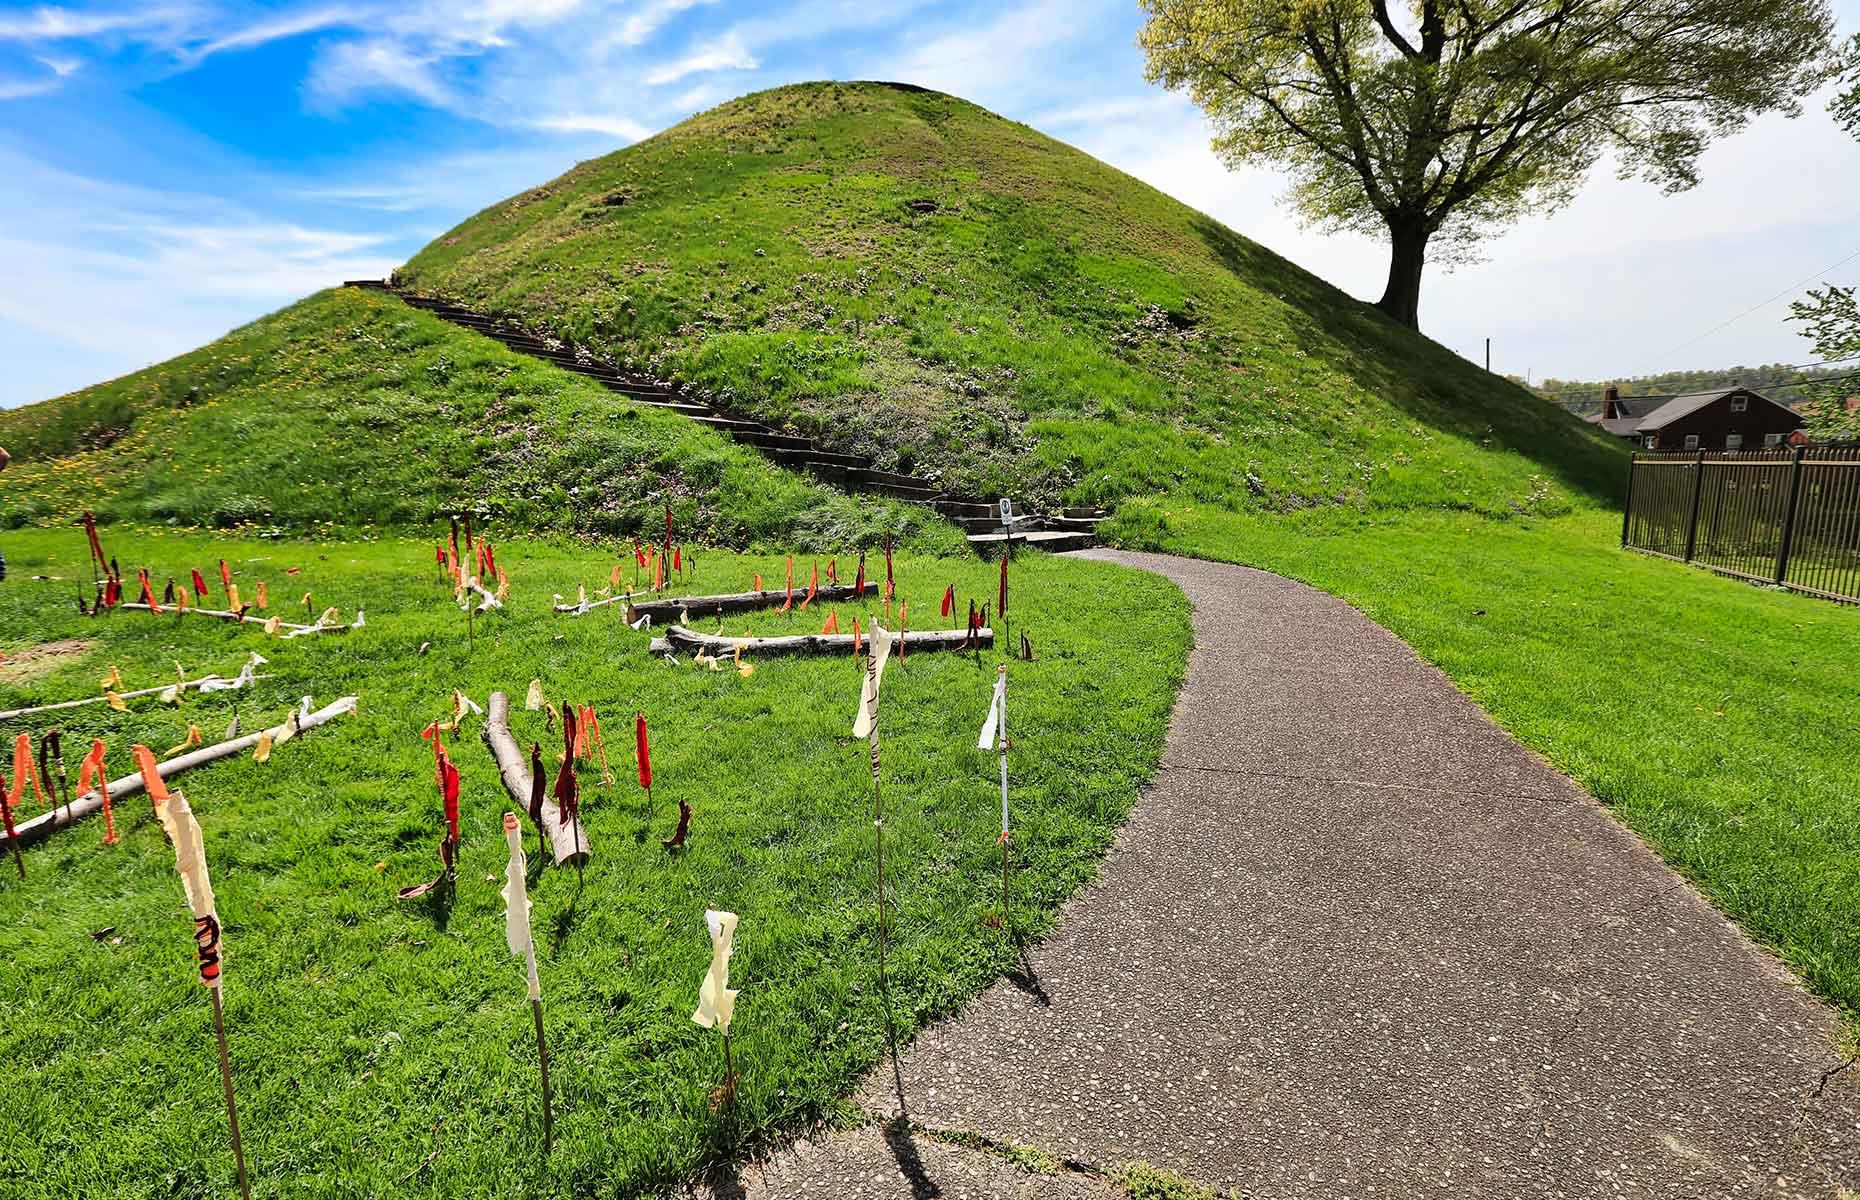 <p>You can visit most of West Virginia’s ancient earth mounds, but the <a href="https://wvculture.org/explore/grave-creek-mound/">Grave Creek Mound</a> in Moundsville is one of the most impressive. Back in 250 BC, the Adena people used more than 57,000 tons of sand and earth to create one of the largest Adena mounds ever found, and today you can follow a winding trail up to the top. The site now forms part of the Grave Creek Archaeological Complex, and a trip to the museum will take you all the way back to the Ice Age.</p>  <p><a href="https://www.loveexploring.com/galleries/138023/the-best-budgetfriendly-family-day-out-in-your-state?page=1"><strong>This is the best budget-friendly family day out in your state</strong></a></p>